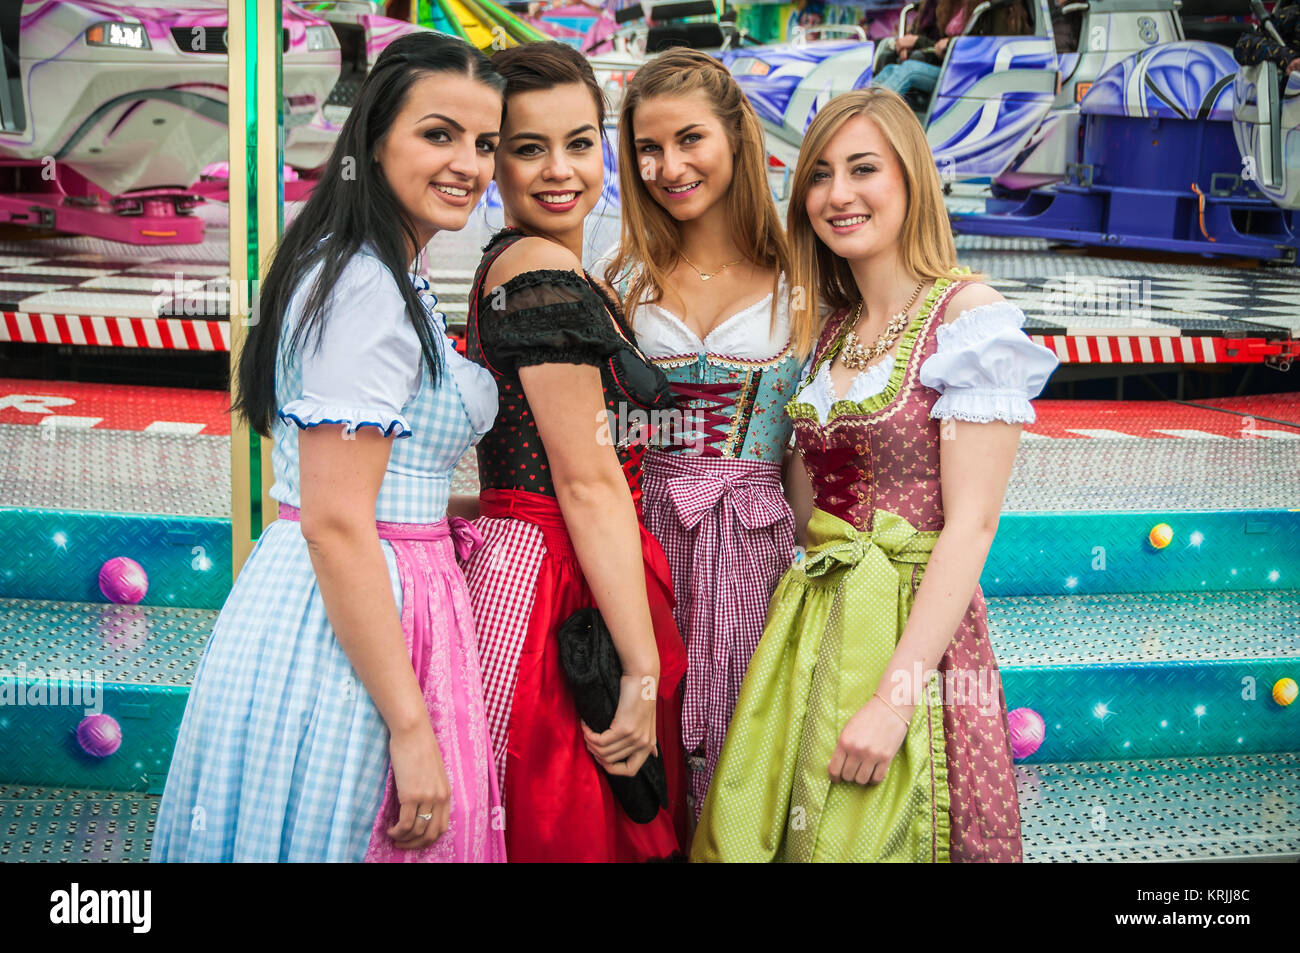 Attractive and joyful woamn at German Oktoberfest with traditional dirndl dresses and joyride in the background. Stock Photo